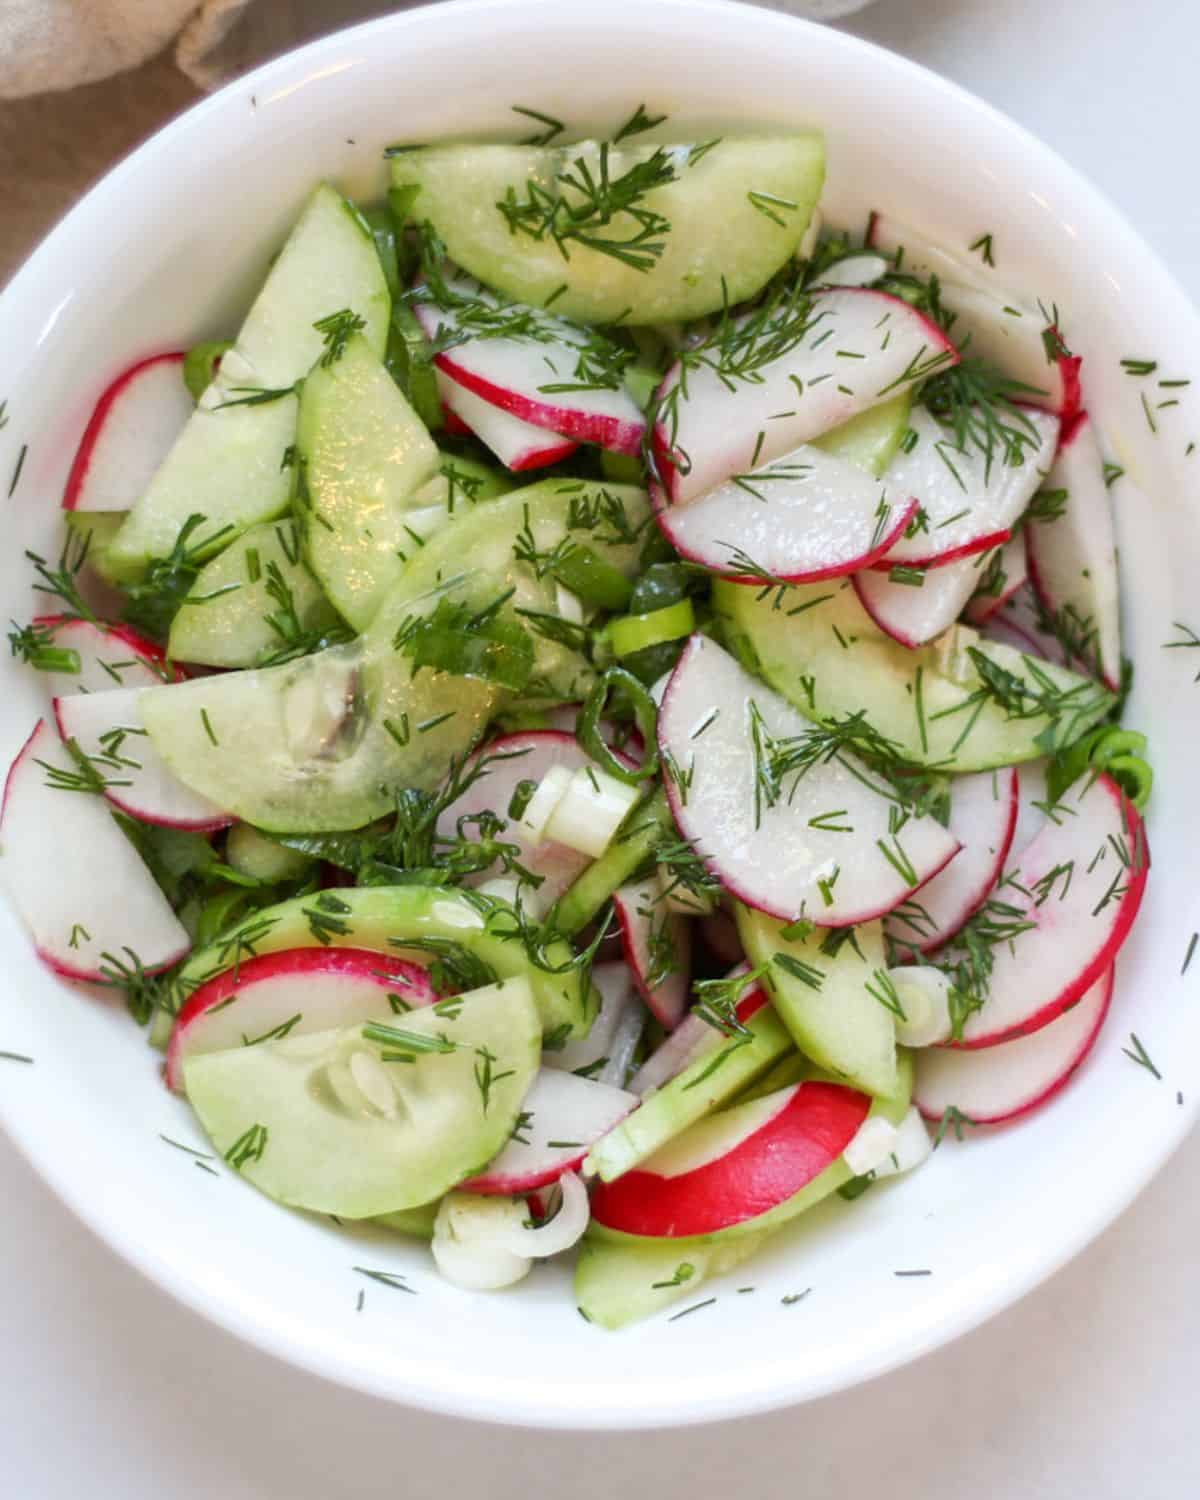 Cucumber and radish salad with fresh dill in a white bowl.